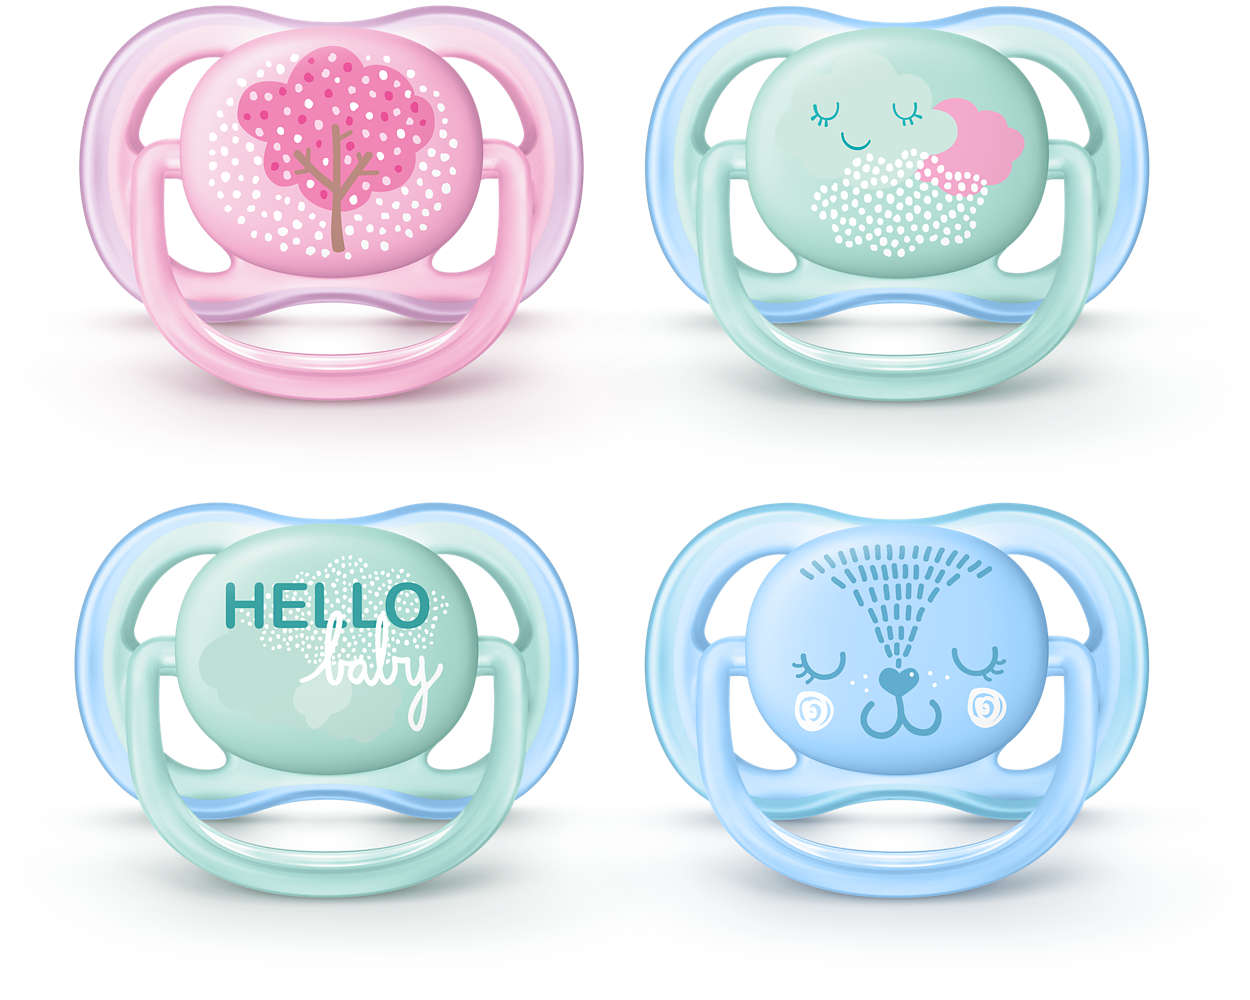 A light, breathable pacifier